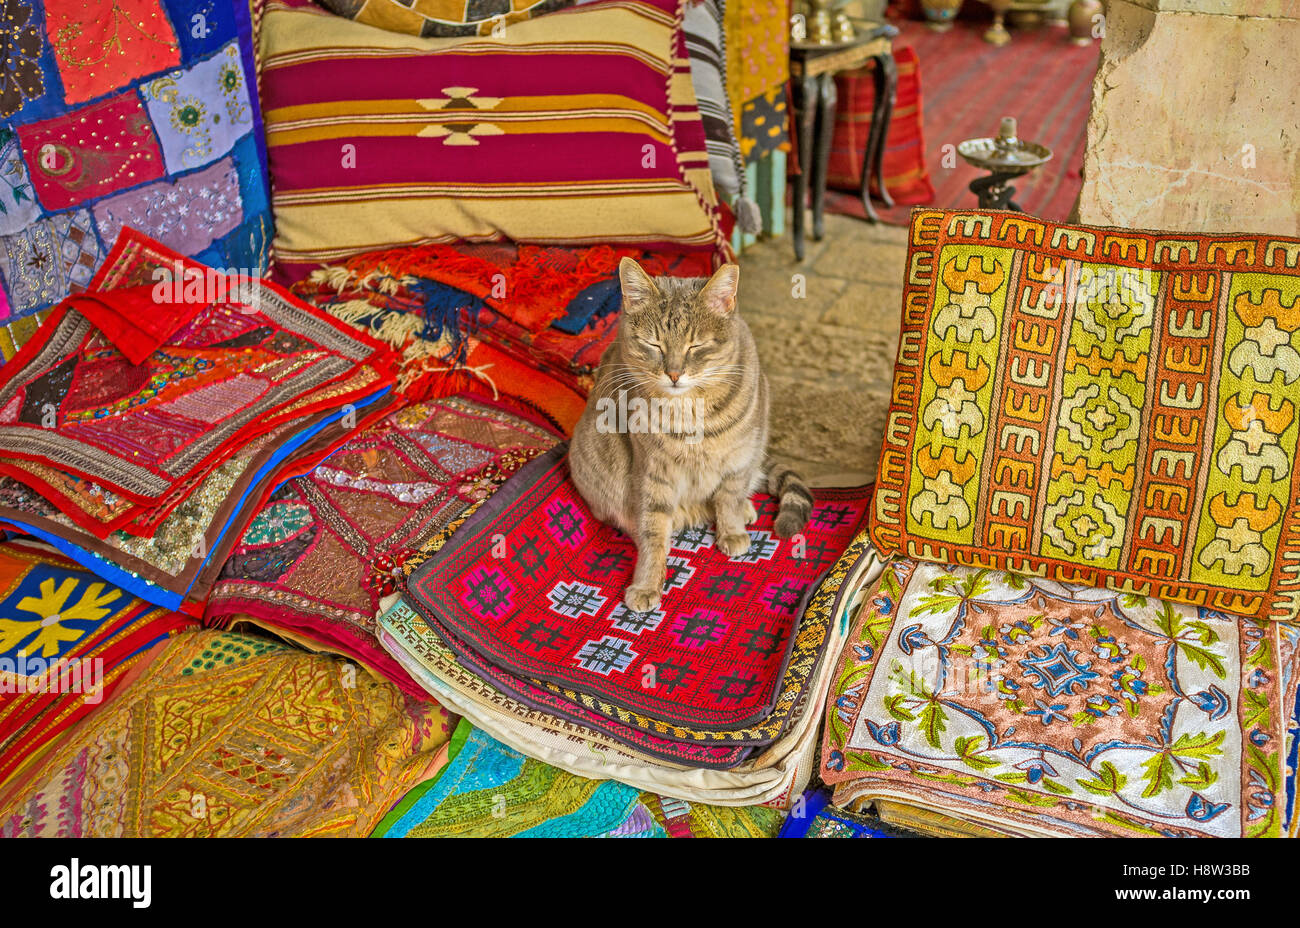 The puss sits on the handmade embroidered pillowcases in the Aftimos Market stall, Jerusalem, Israel. Stock Photo